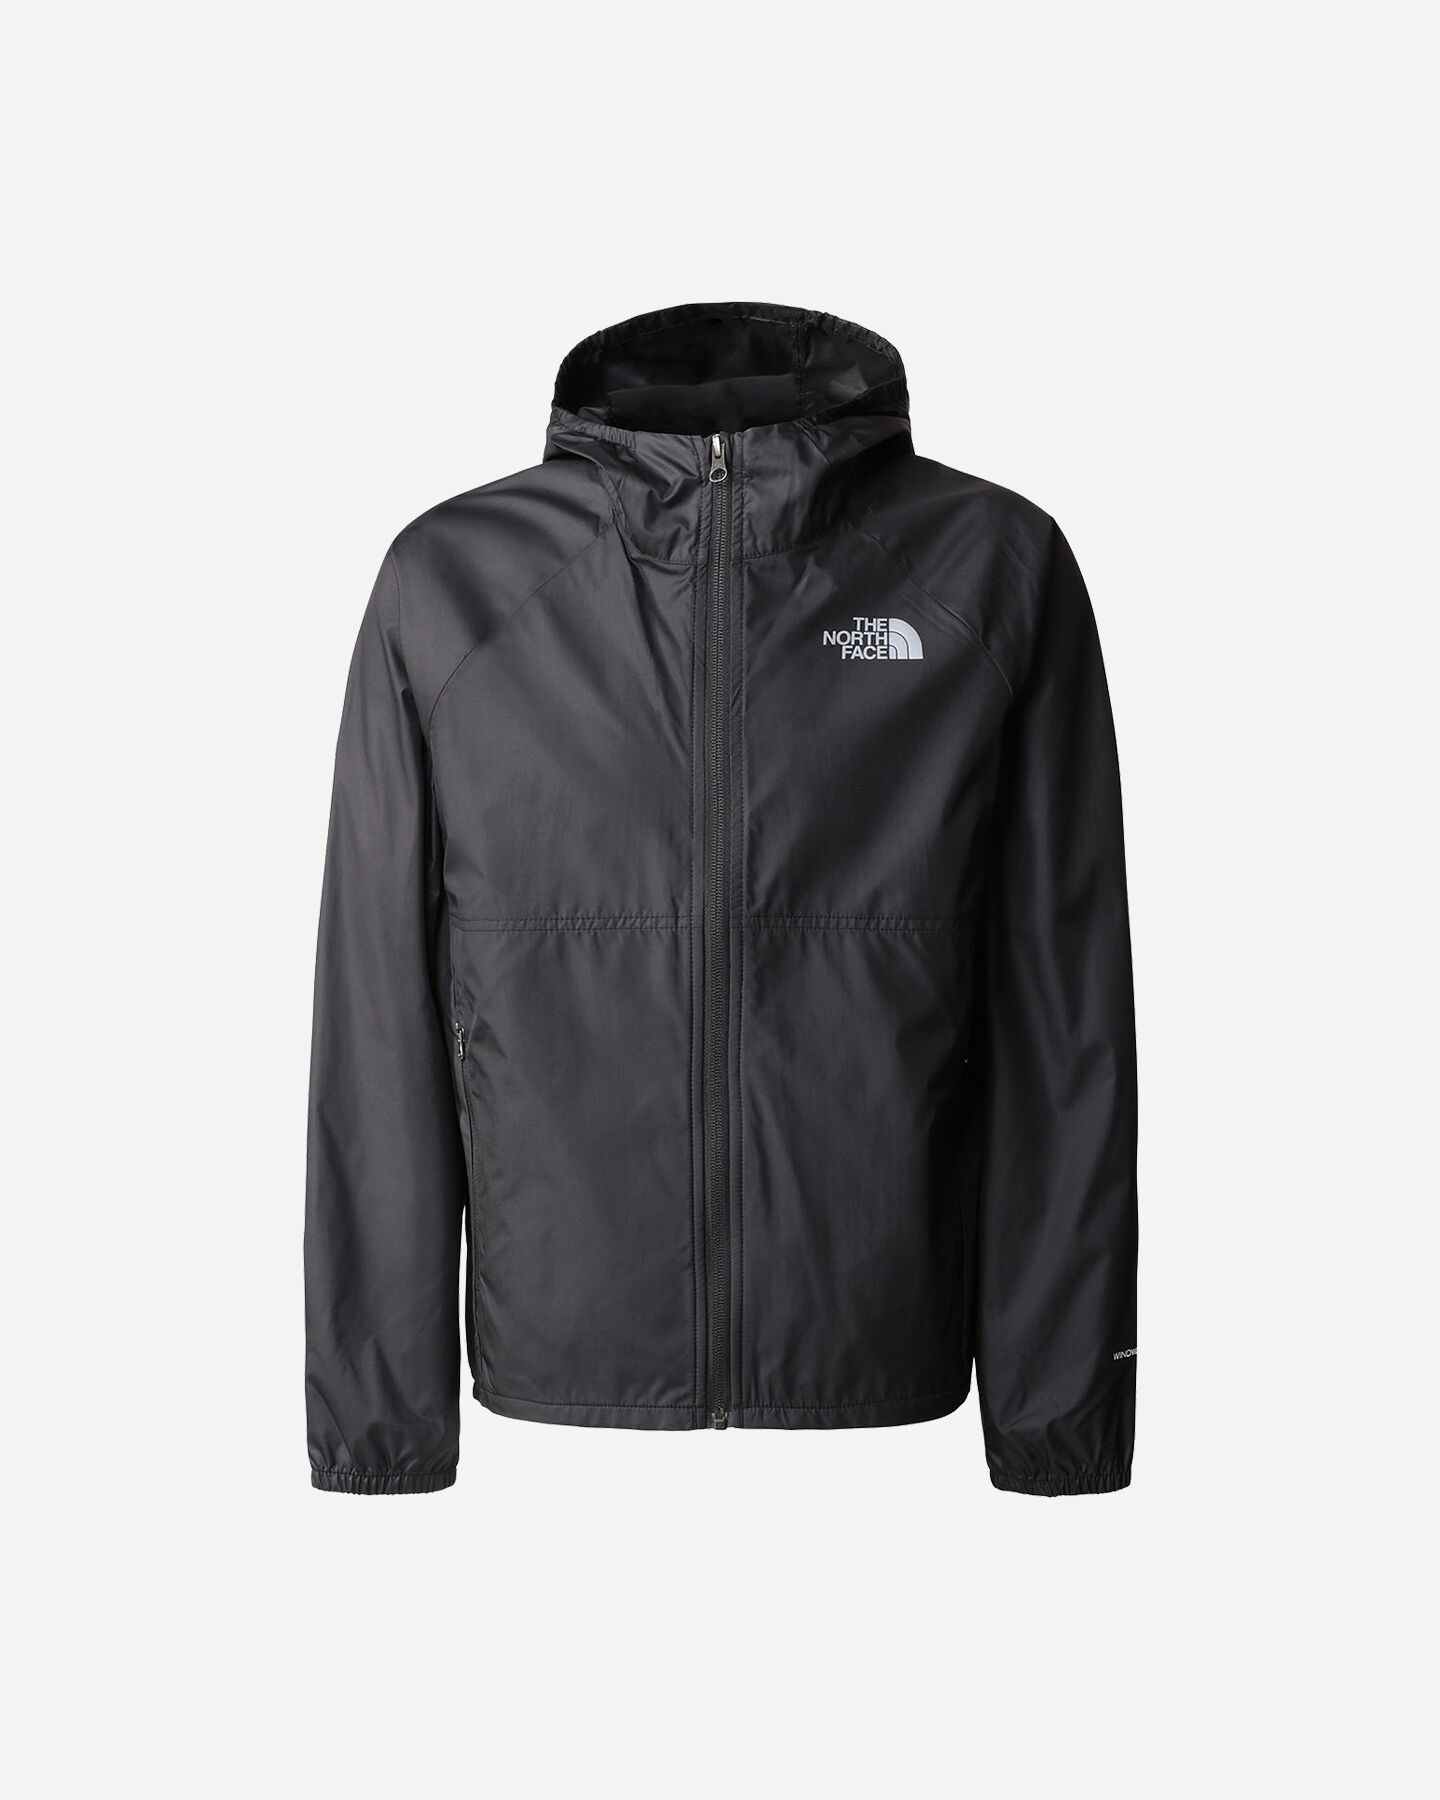  Giubbotto THE NORTH FACE NEVER STOP JR S5537294|JK3|S scatto 0